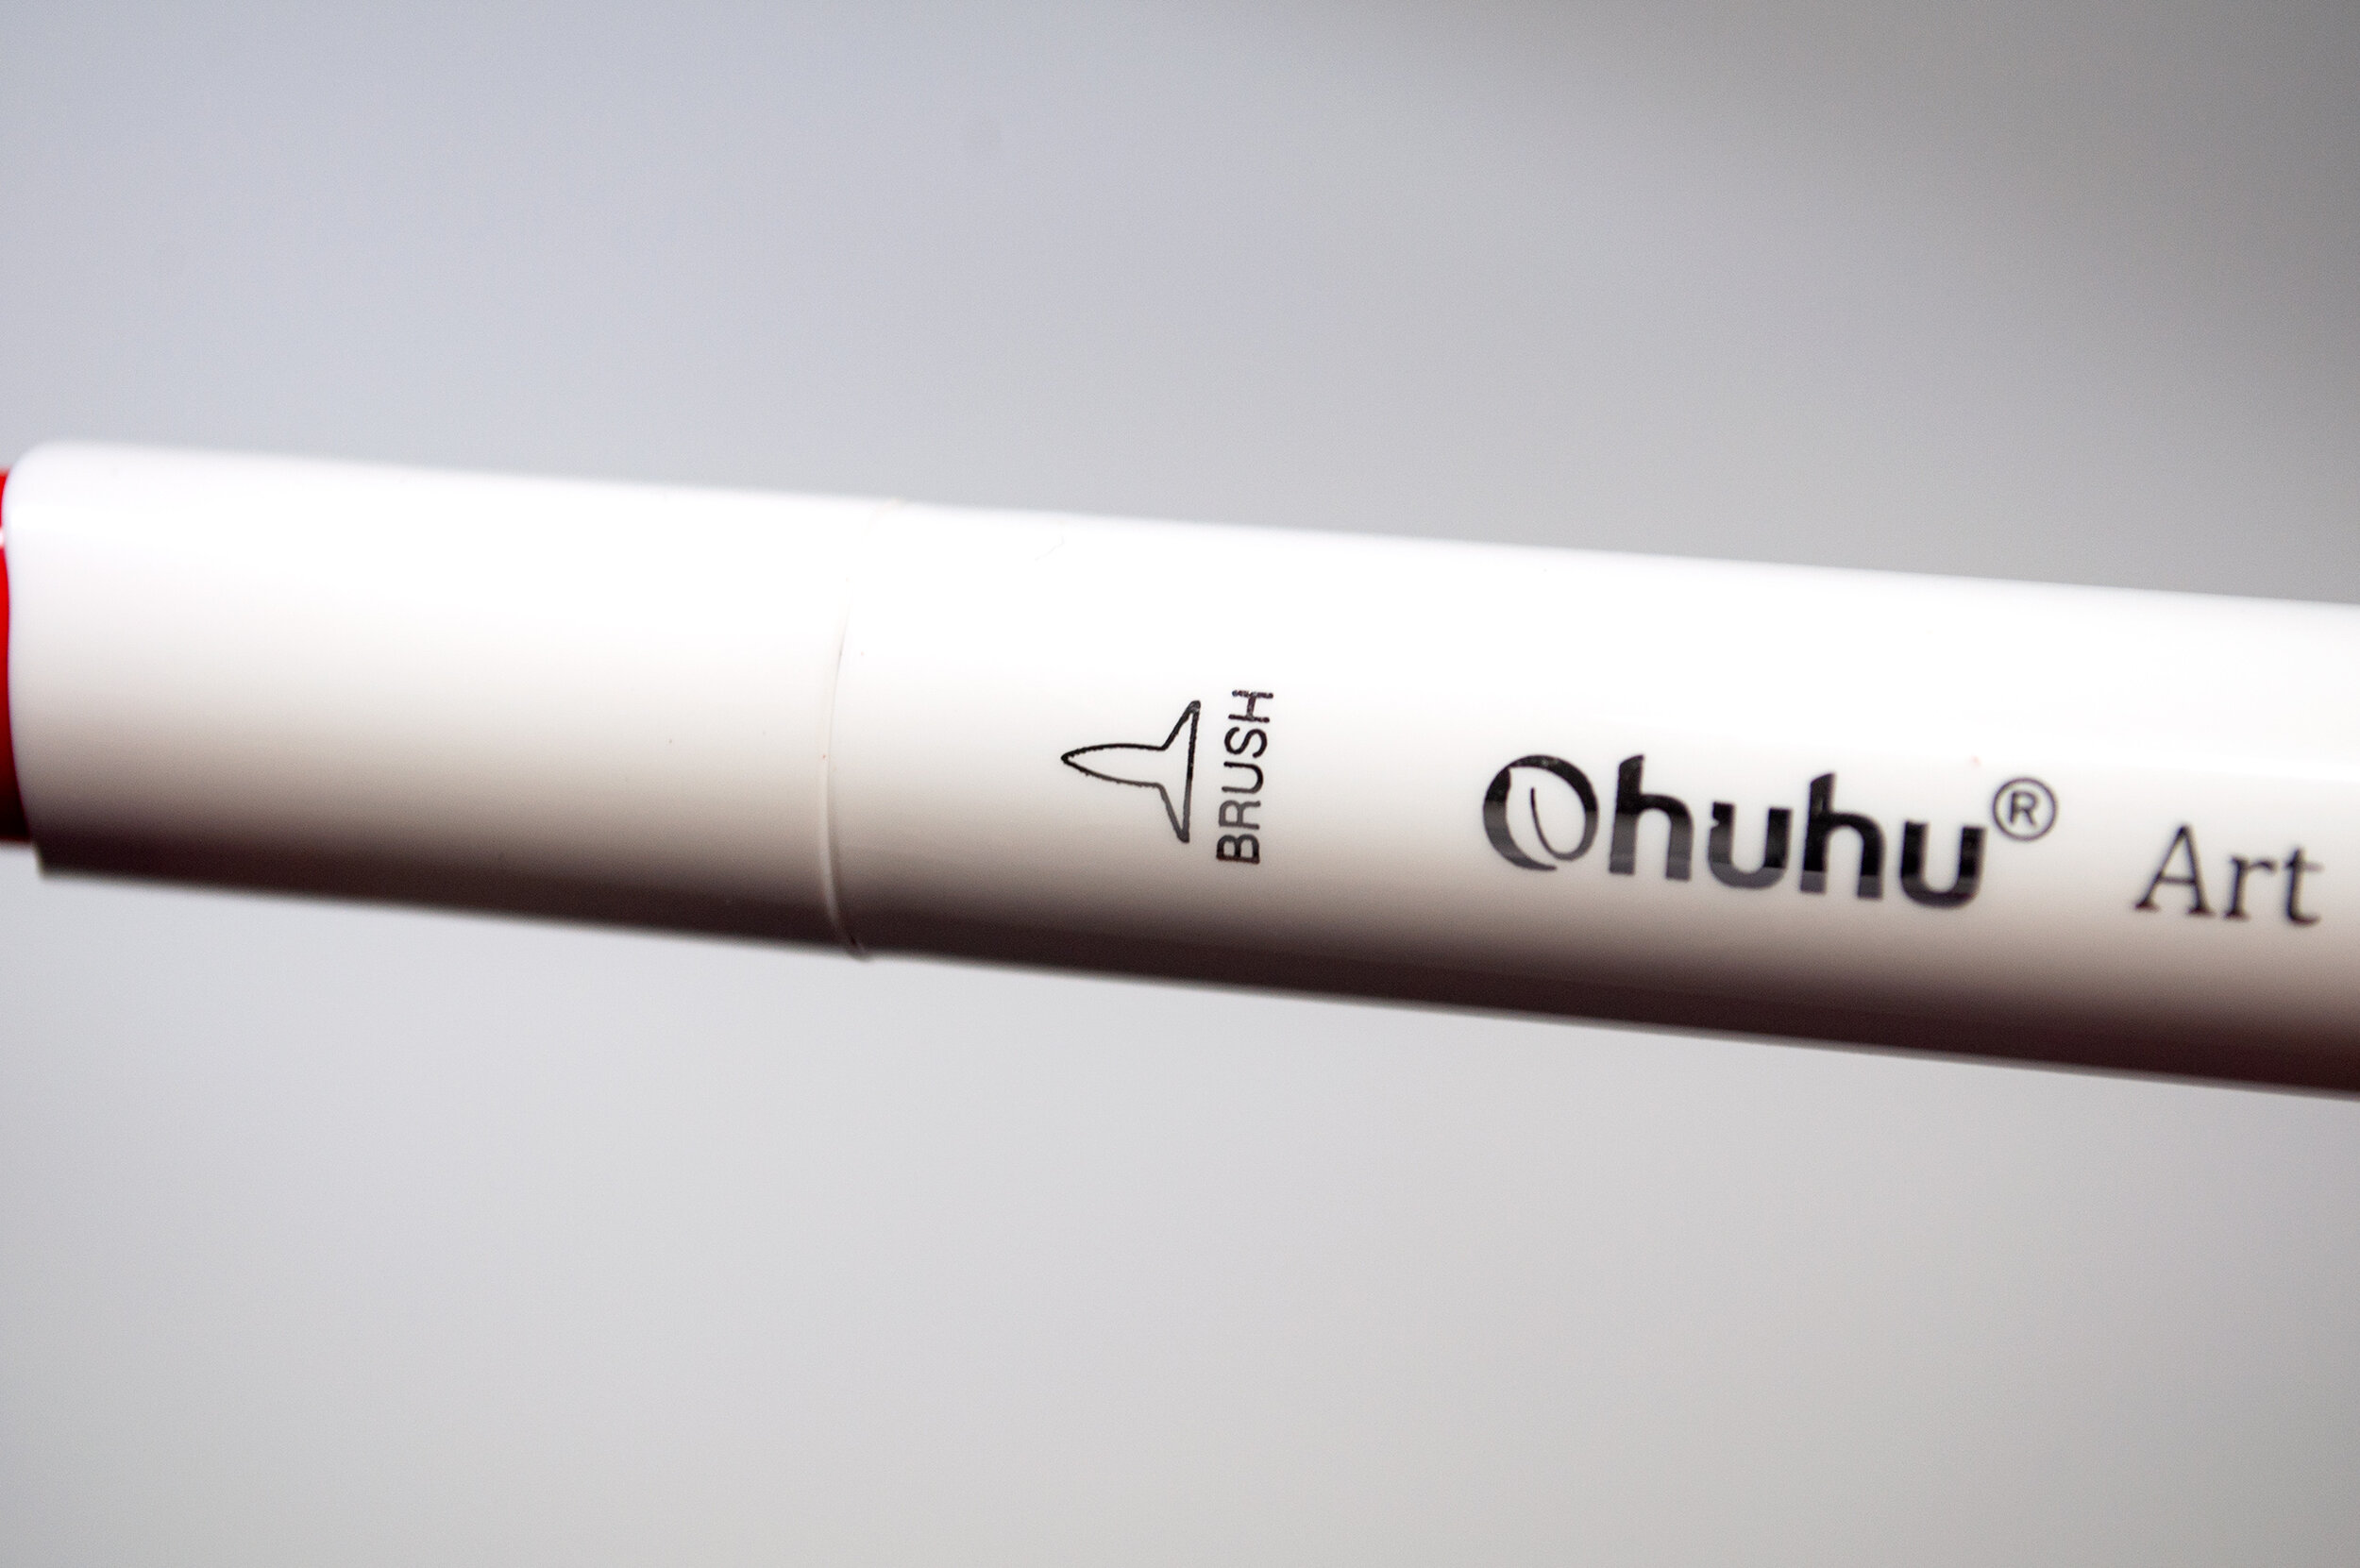 Ohuhu Markers - An Honest and Detailed Review of Ohuhu Brush